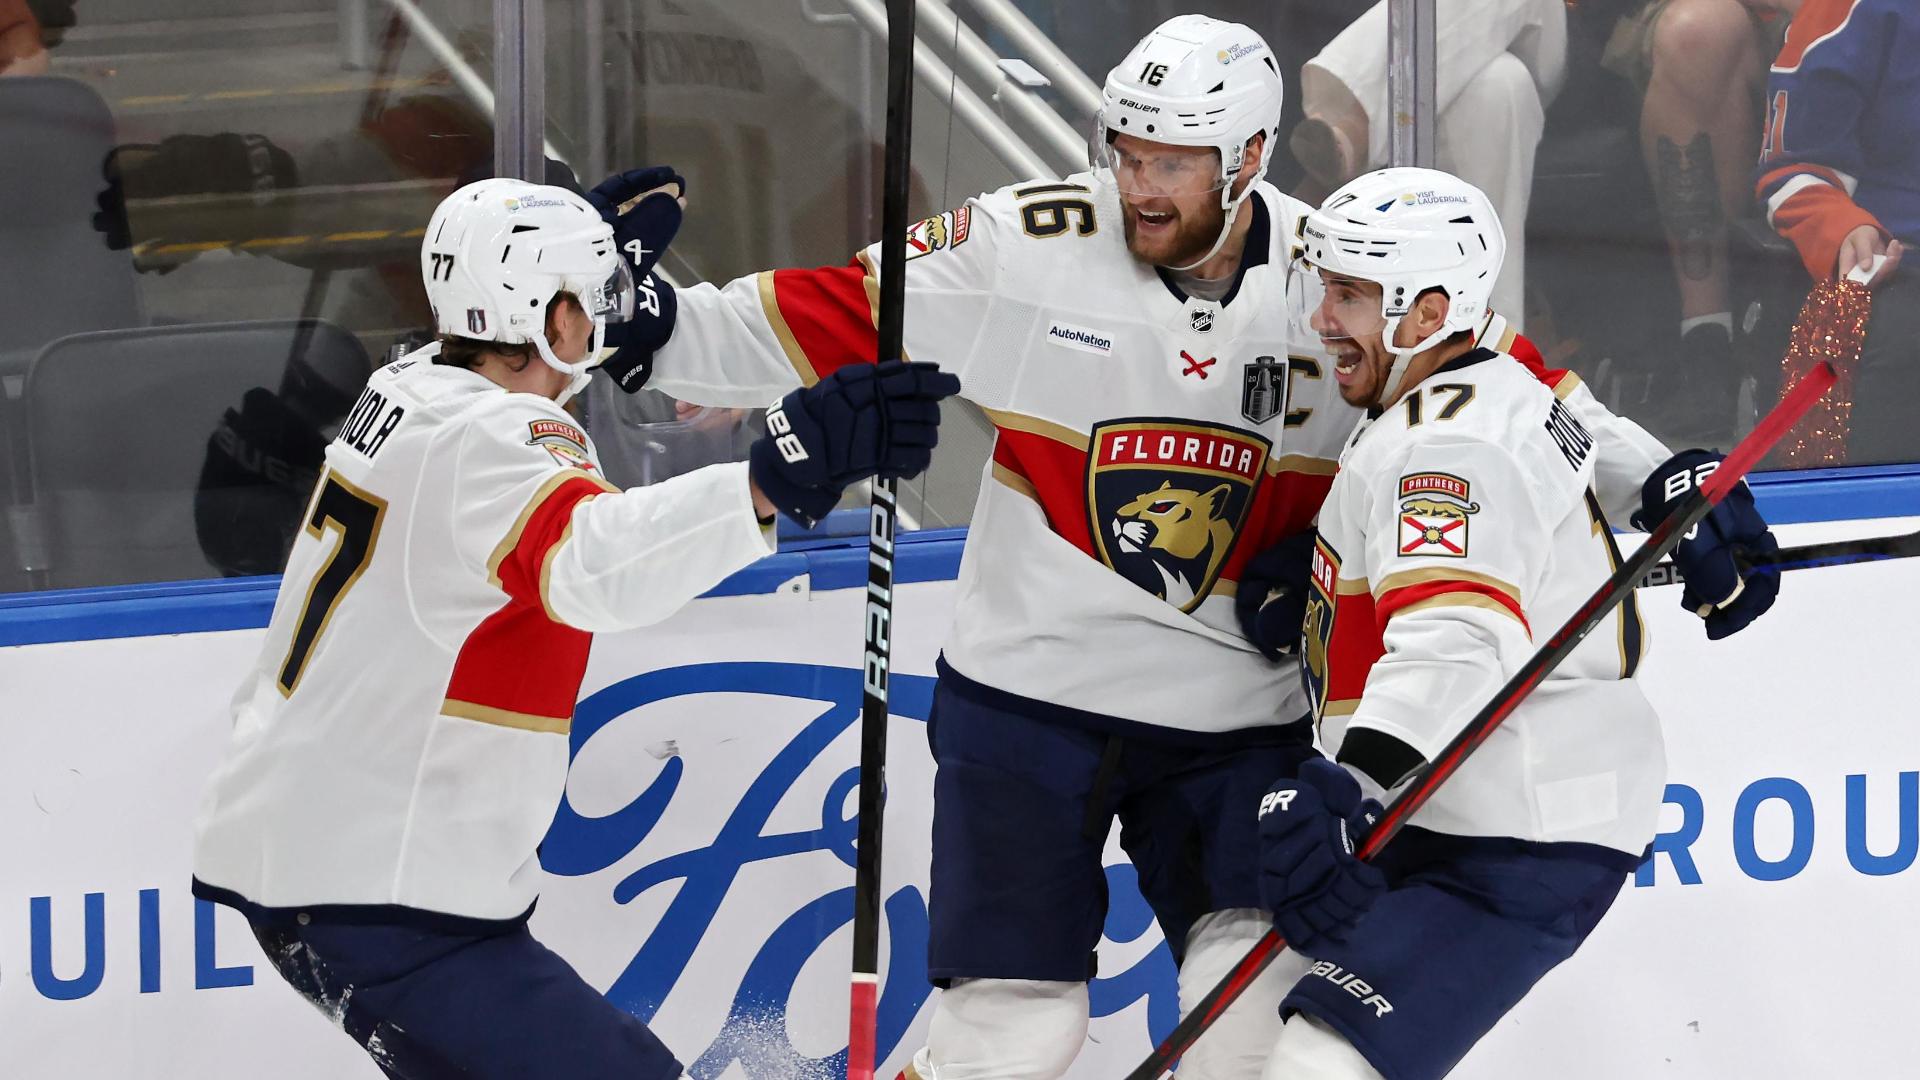 Aleksander Barkov pads Panthers' lead with quick goal